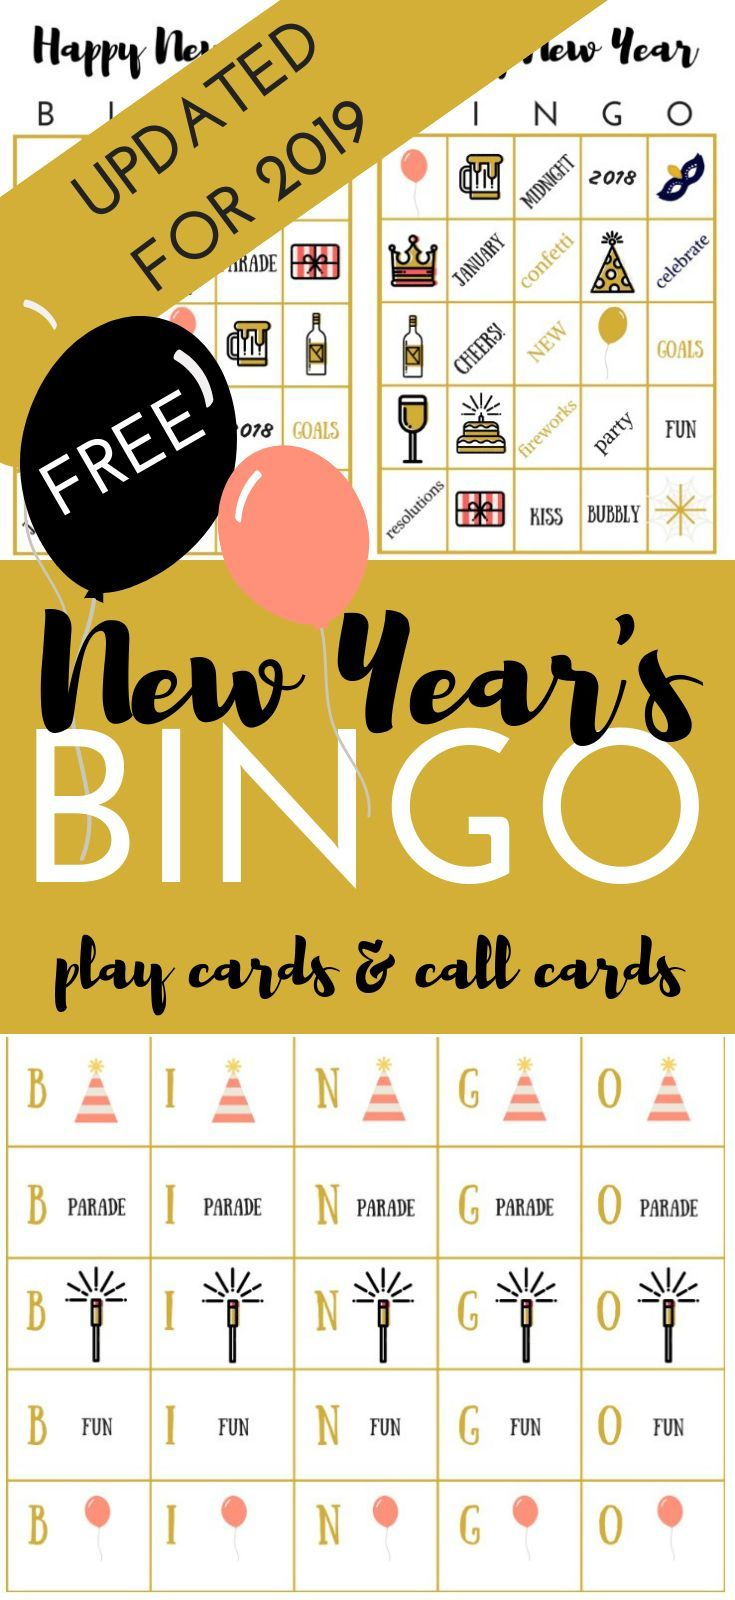 Free New Year&amp;#039;s Bingo Printable Game - New Year&amp;#039;s Party Game